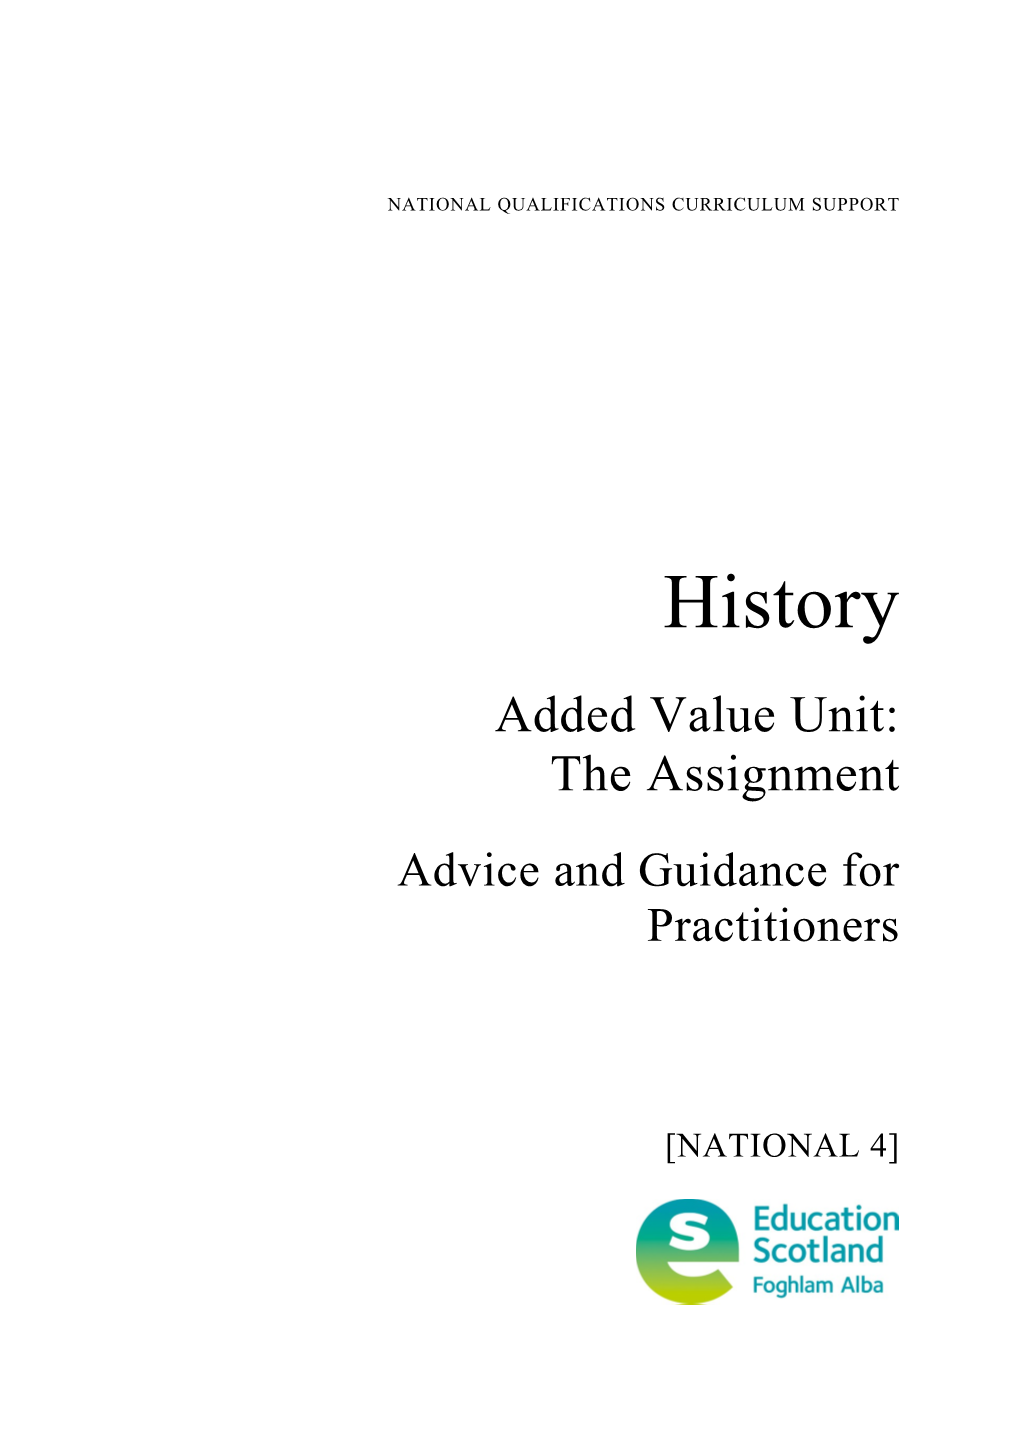 History - Added Value Unit - the Assignment (National 4)